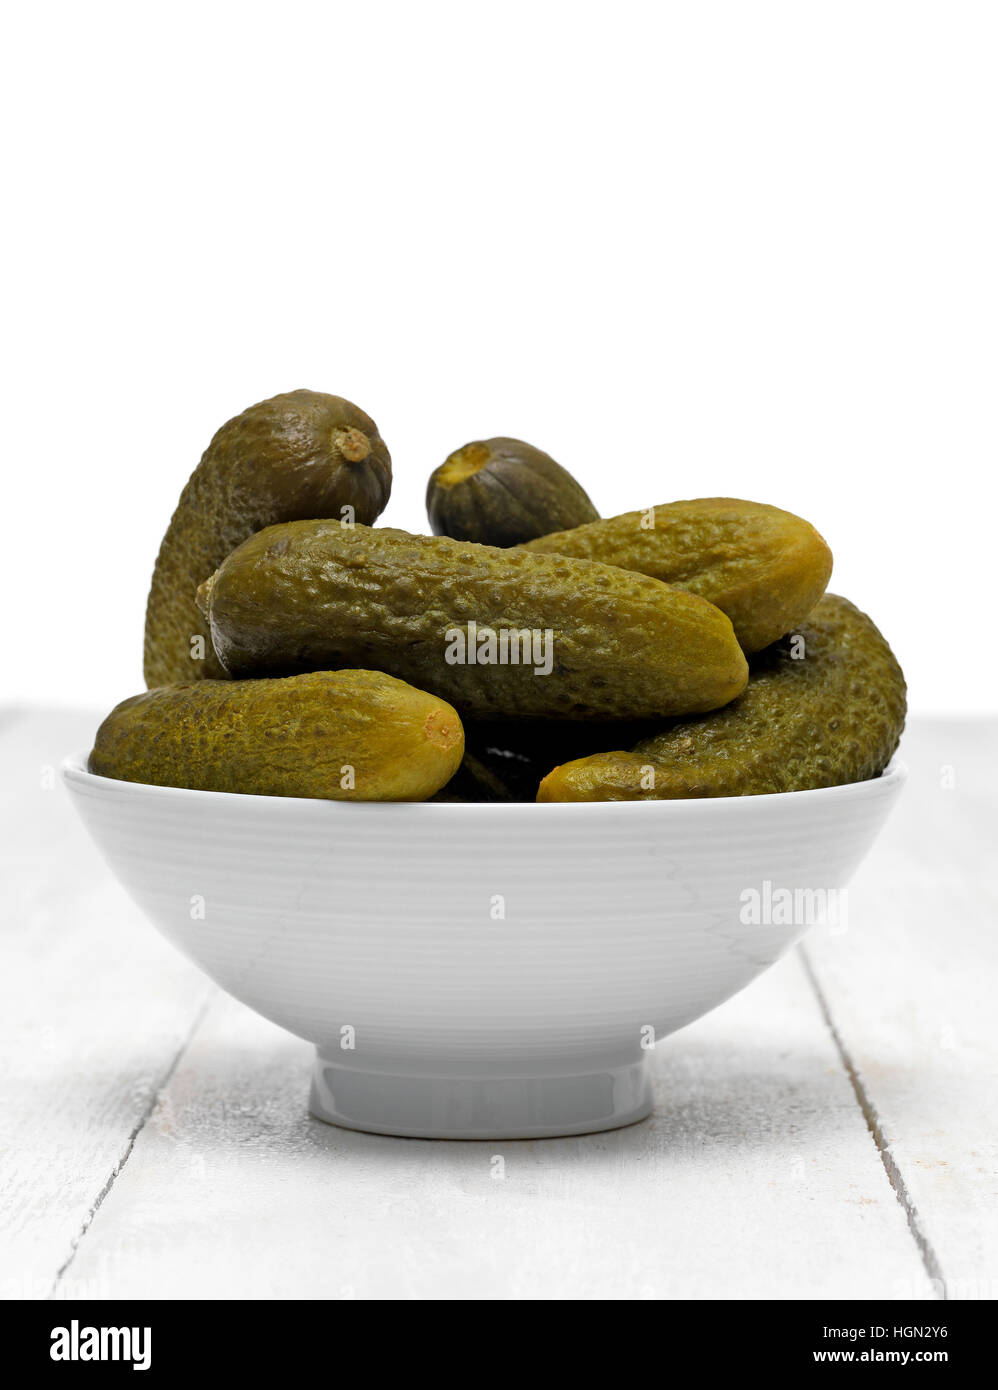 Gherkin in bowl on table top Stock Photo